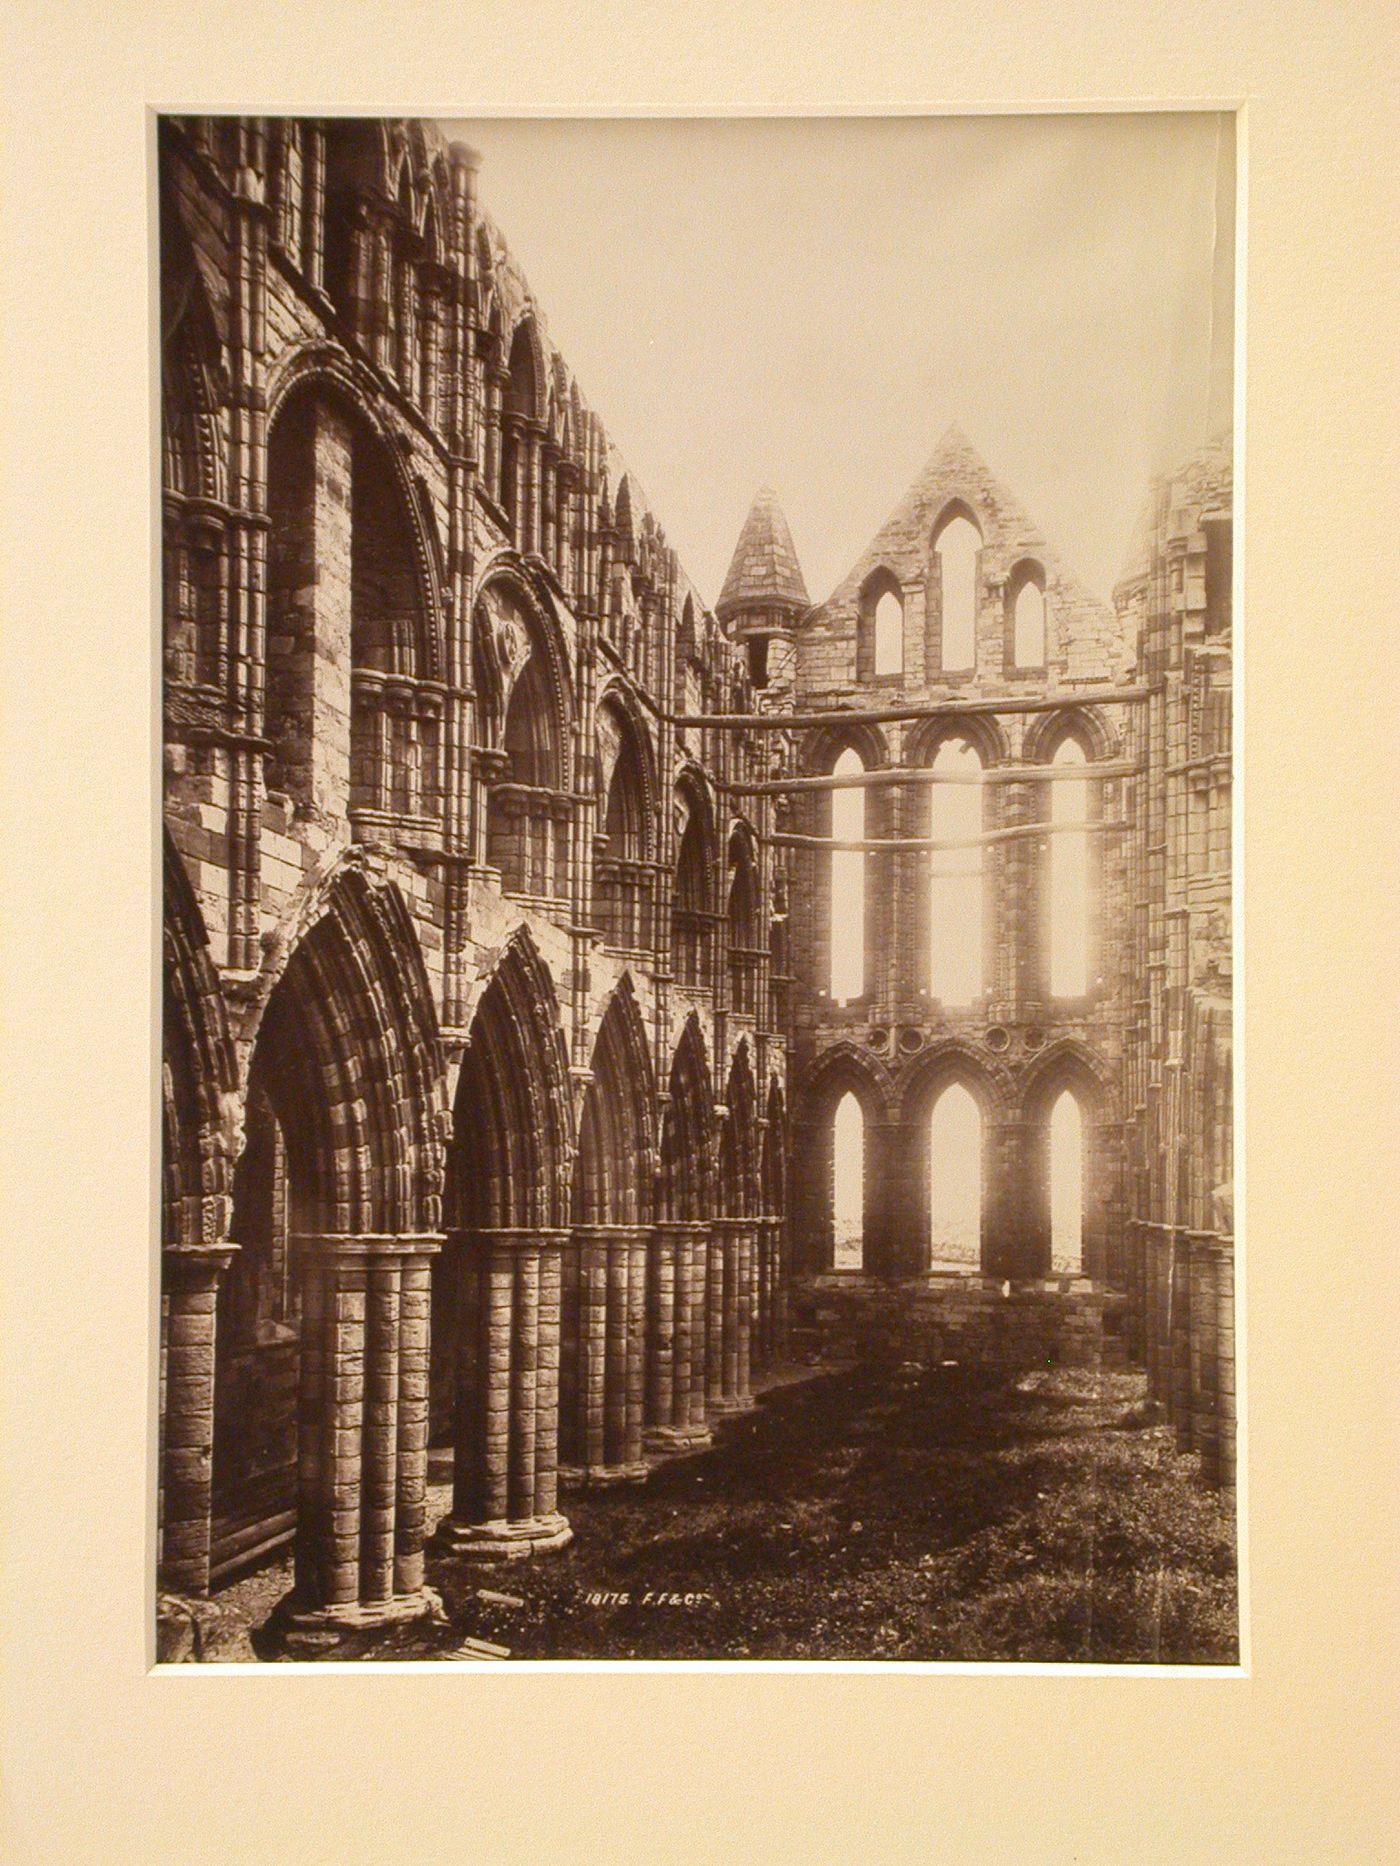 View of interior of nave of ruined church or abbey, England ?